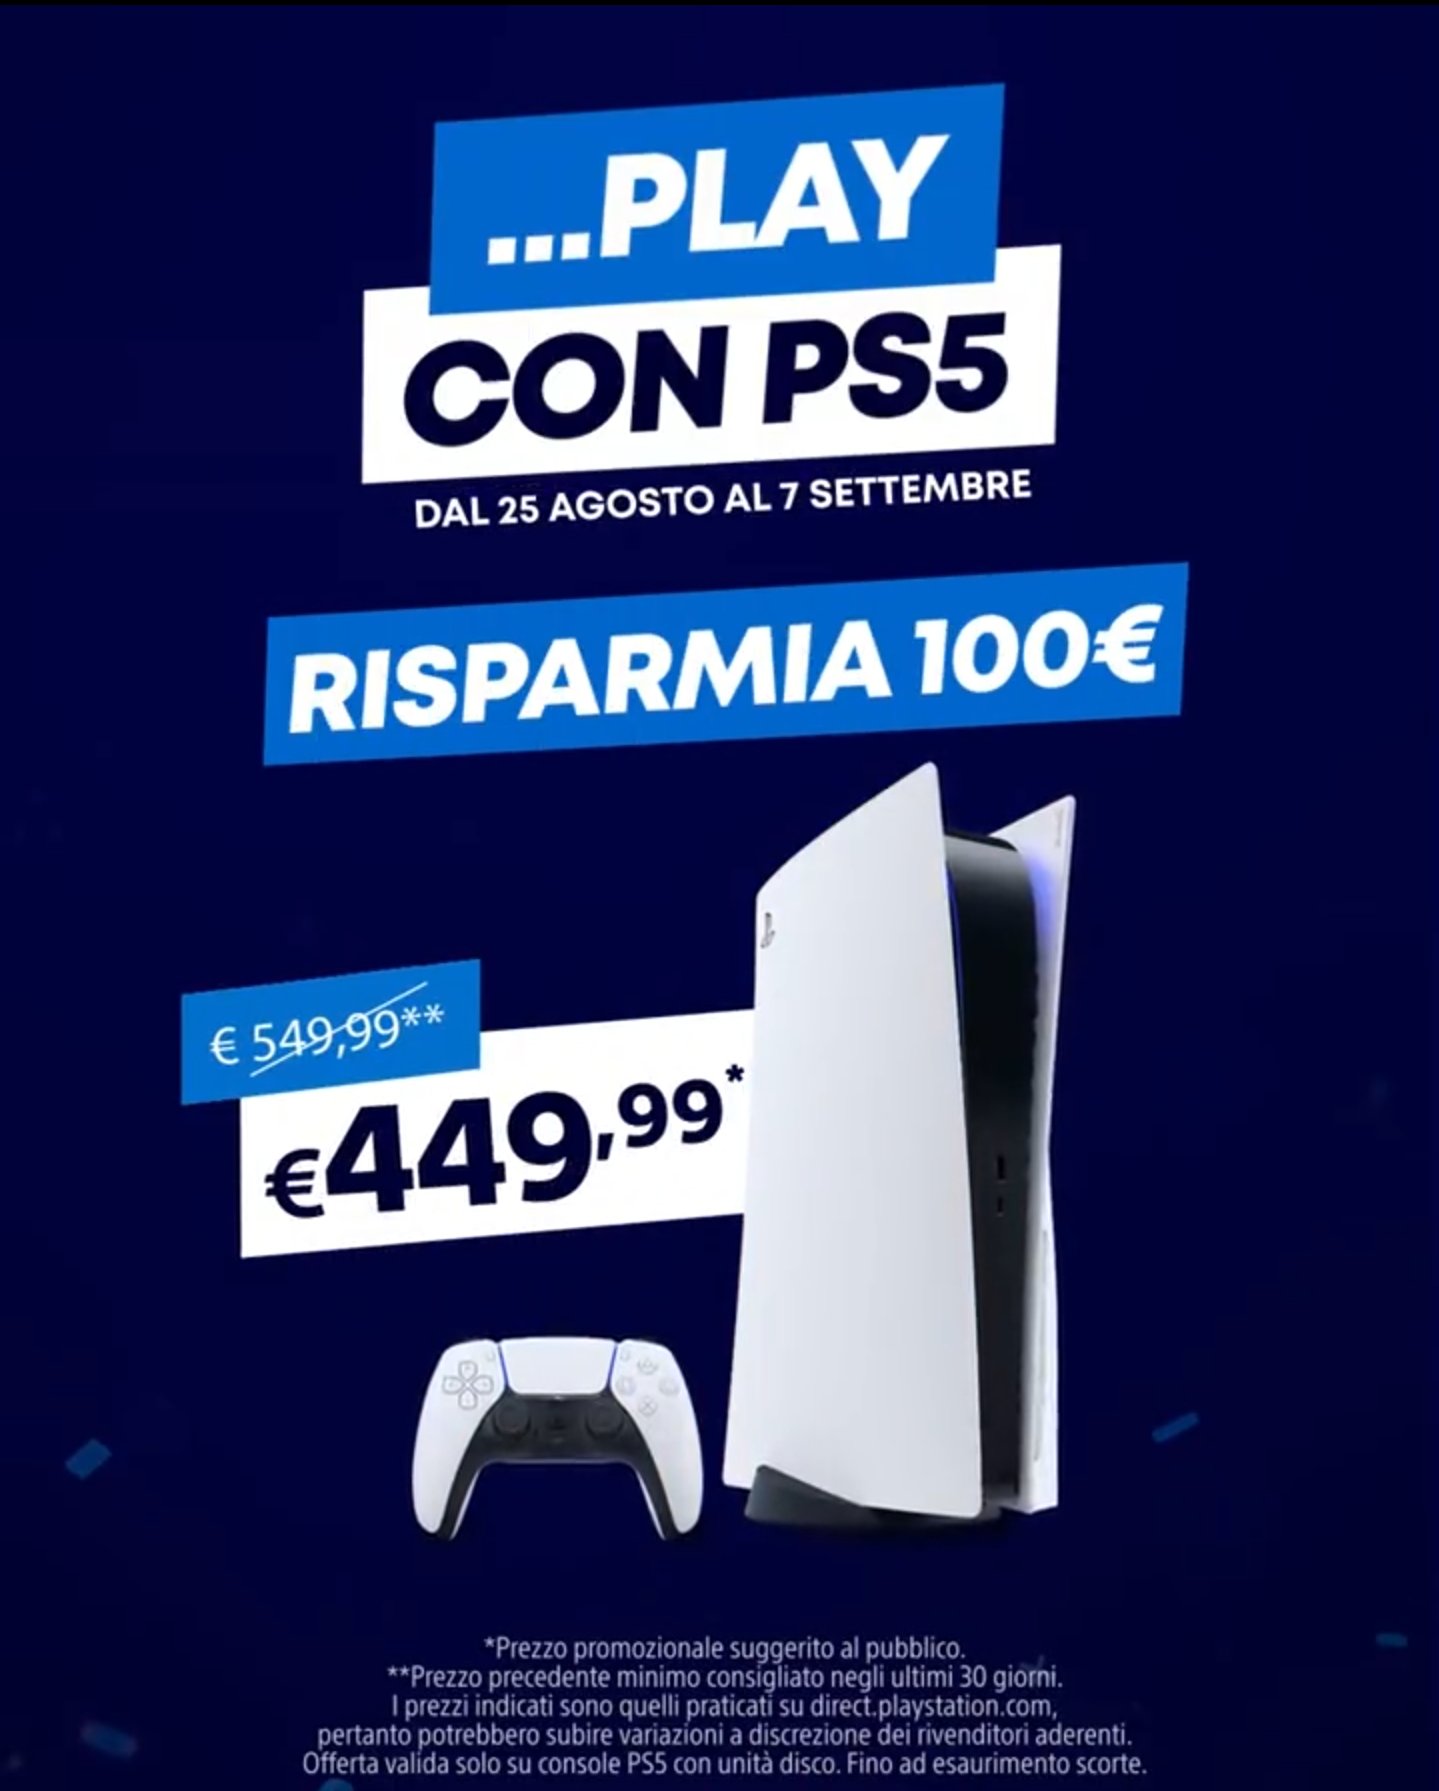 Zuby_Tech on X: PlayStation 5 Drops To €449.99 In Italy: €100 Off